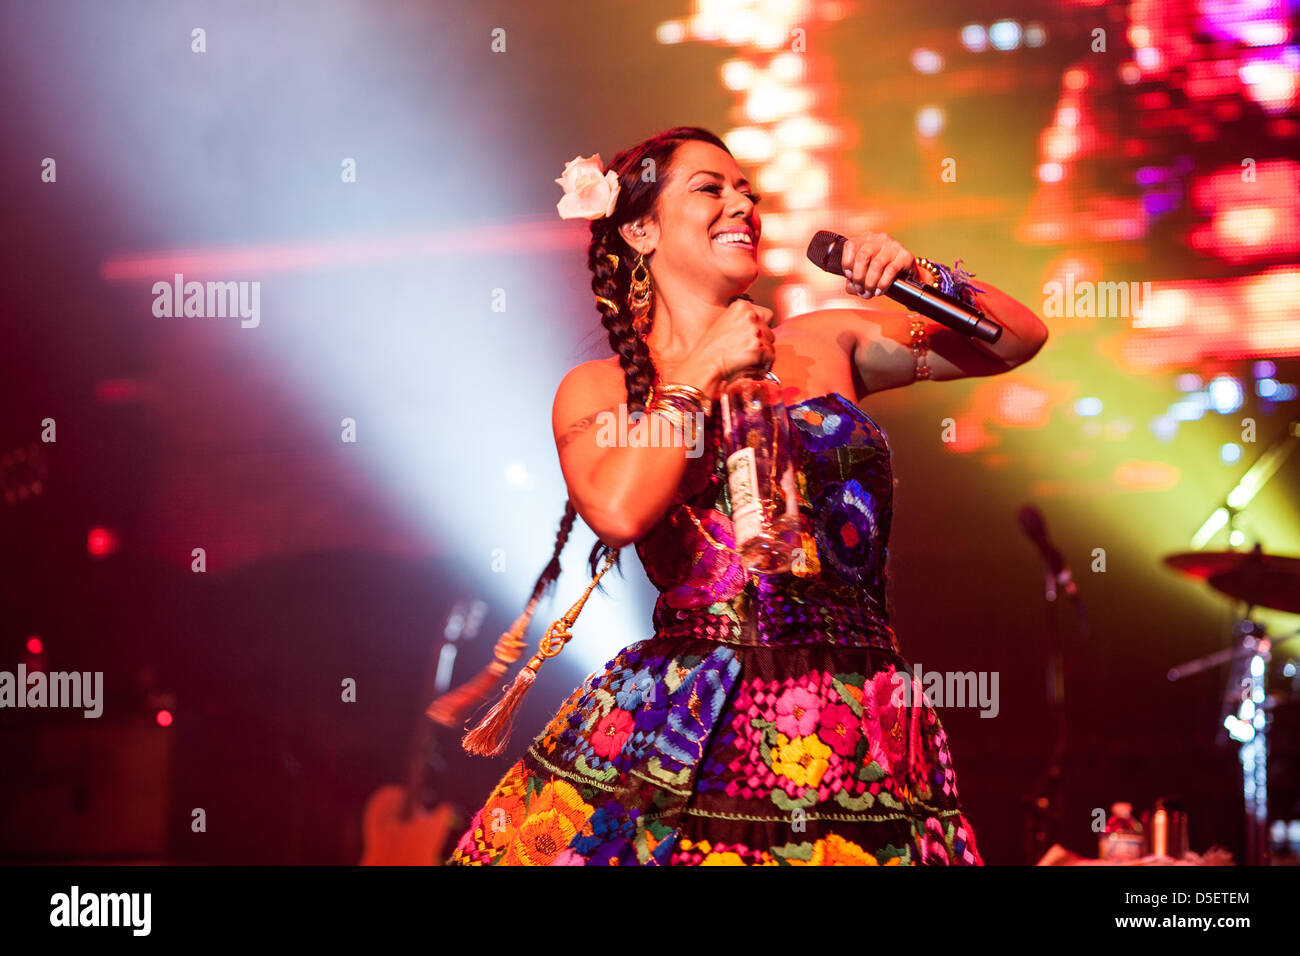 Chicago, USA. 30th March, 2013. Mexican singer-songwriter Lila Downs performs at the Congress Theater in Chicago, USA. Credit: Max Herman/Alamy Live News Stock Photo